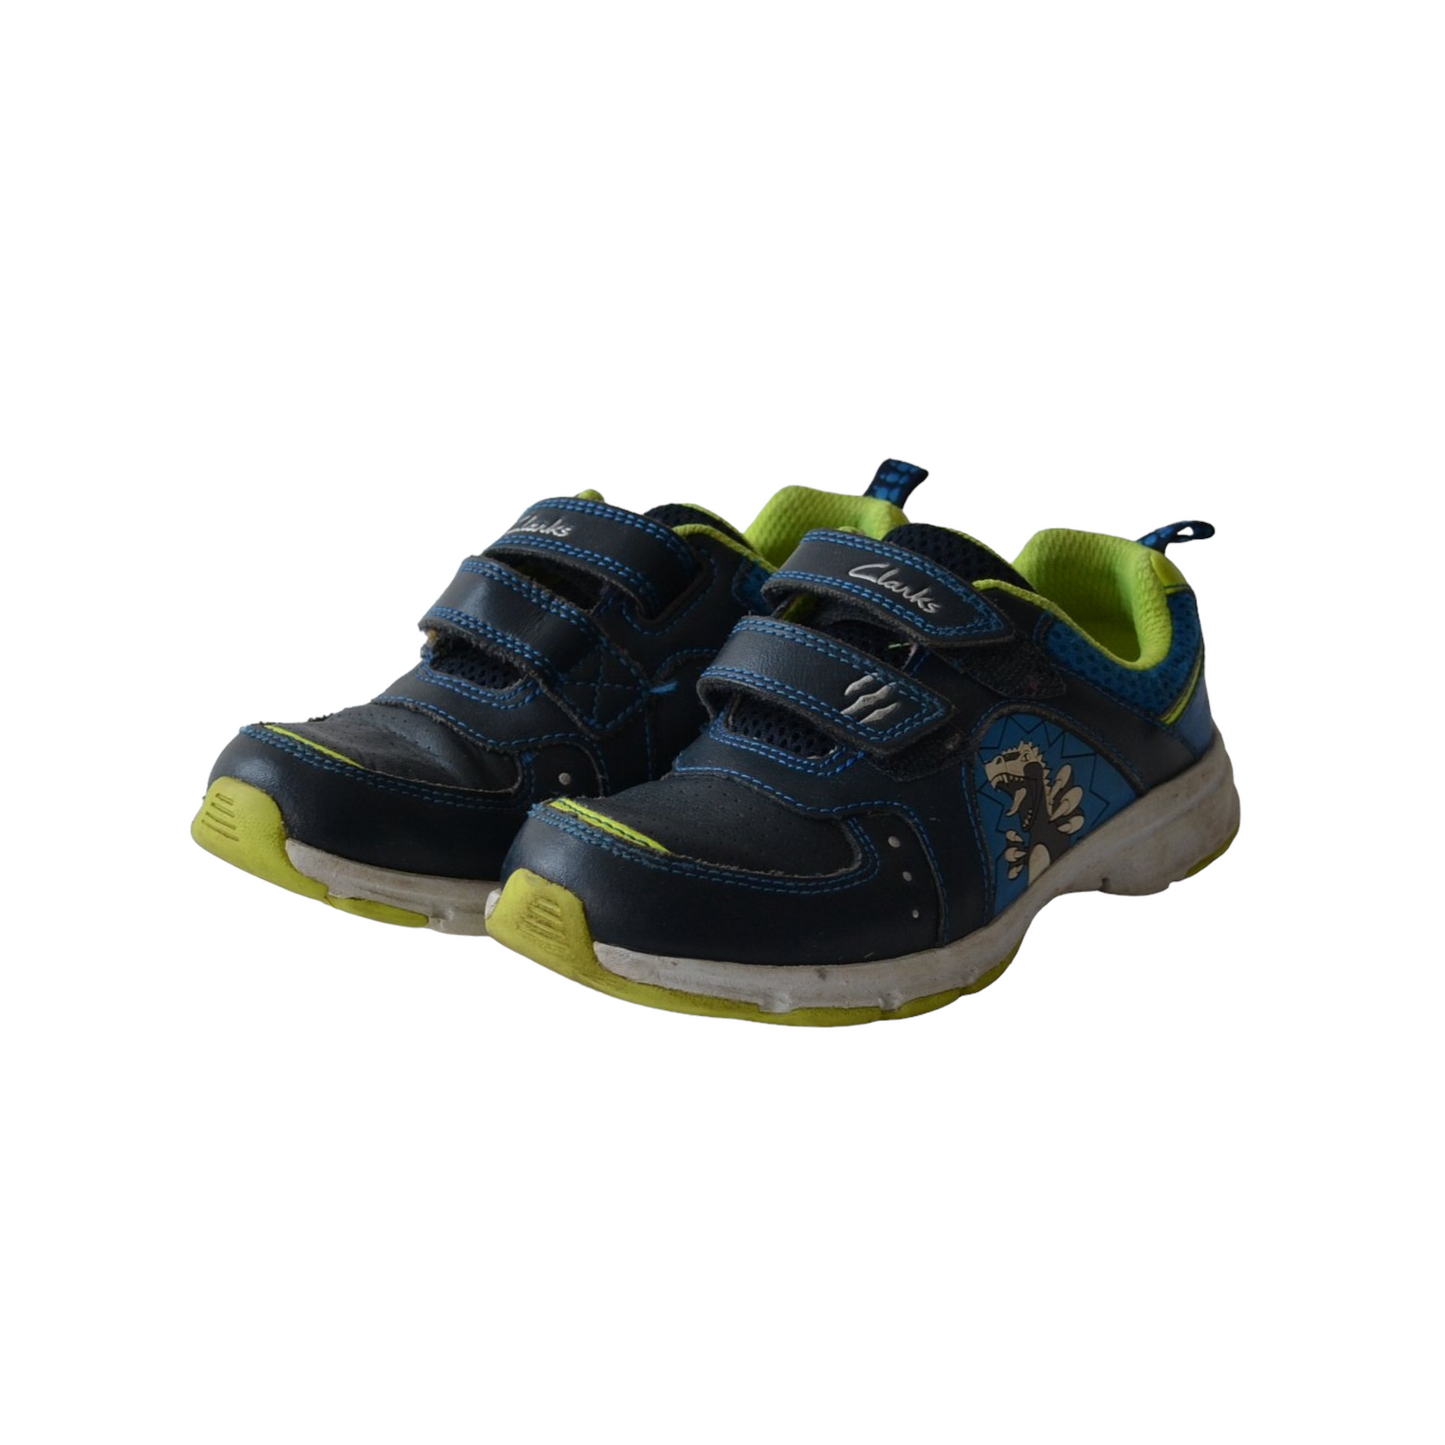 Clarks Navy Blue and Neon Dinosaur Trainers Shoe Size 10.5 (jr)